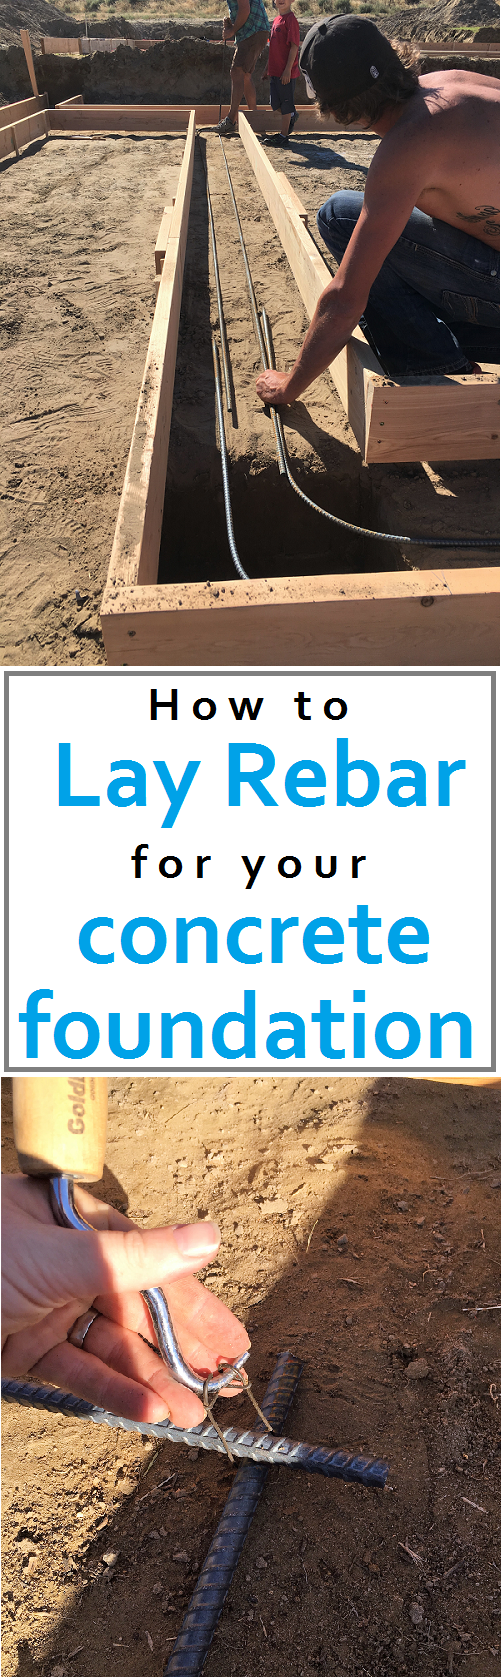 How to lay rebar for your concrete foundation. Cost and time outline. How to build your own house